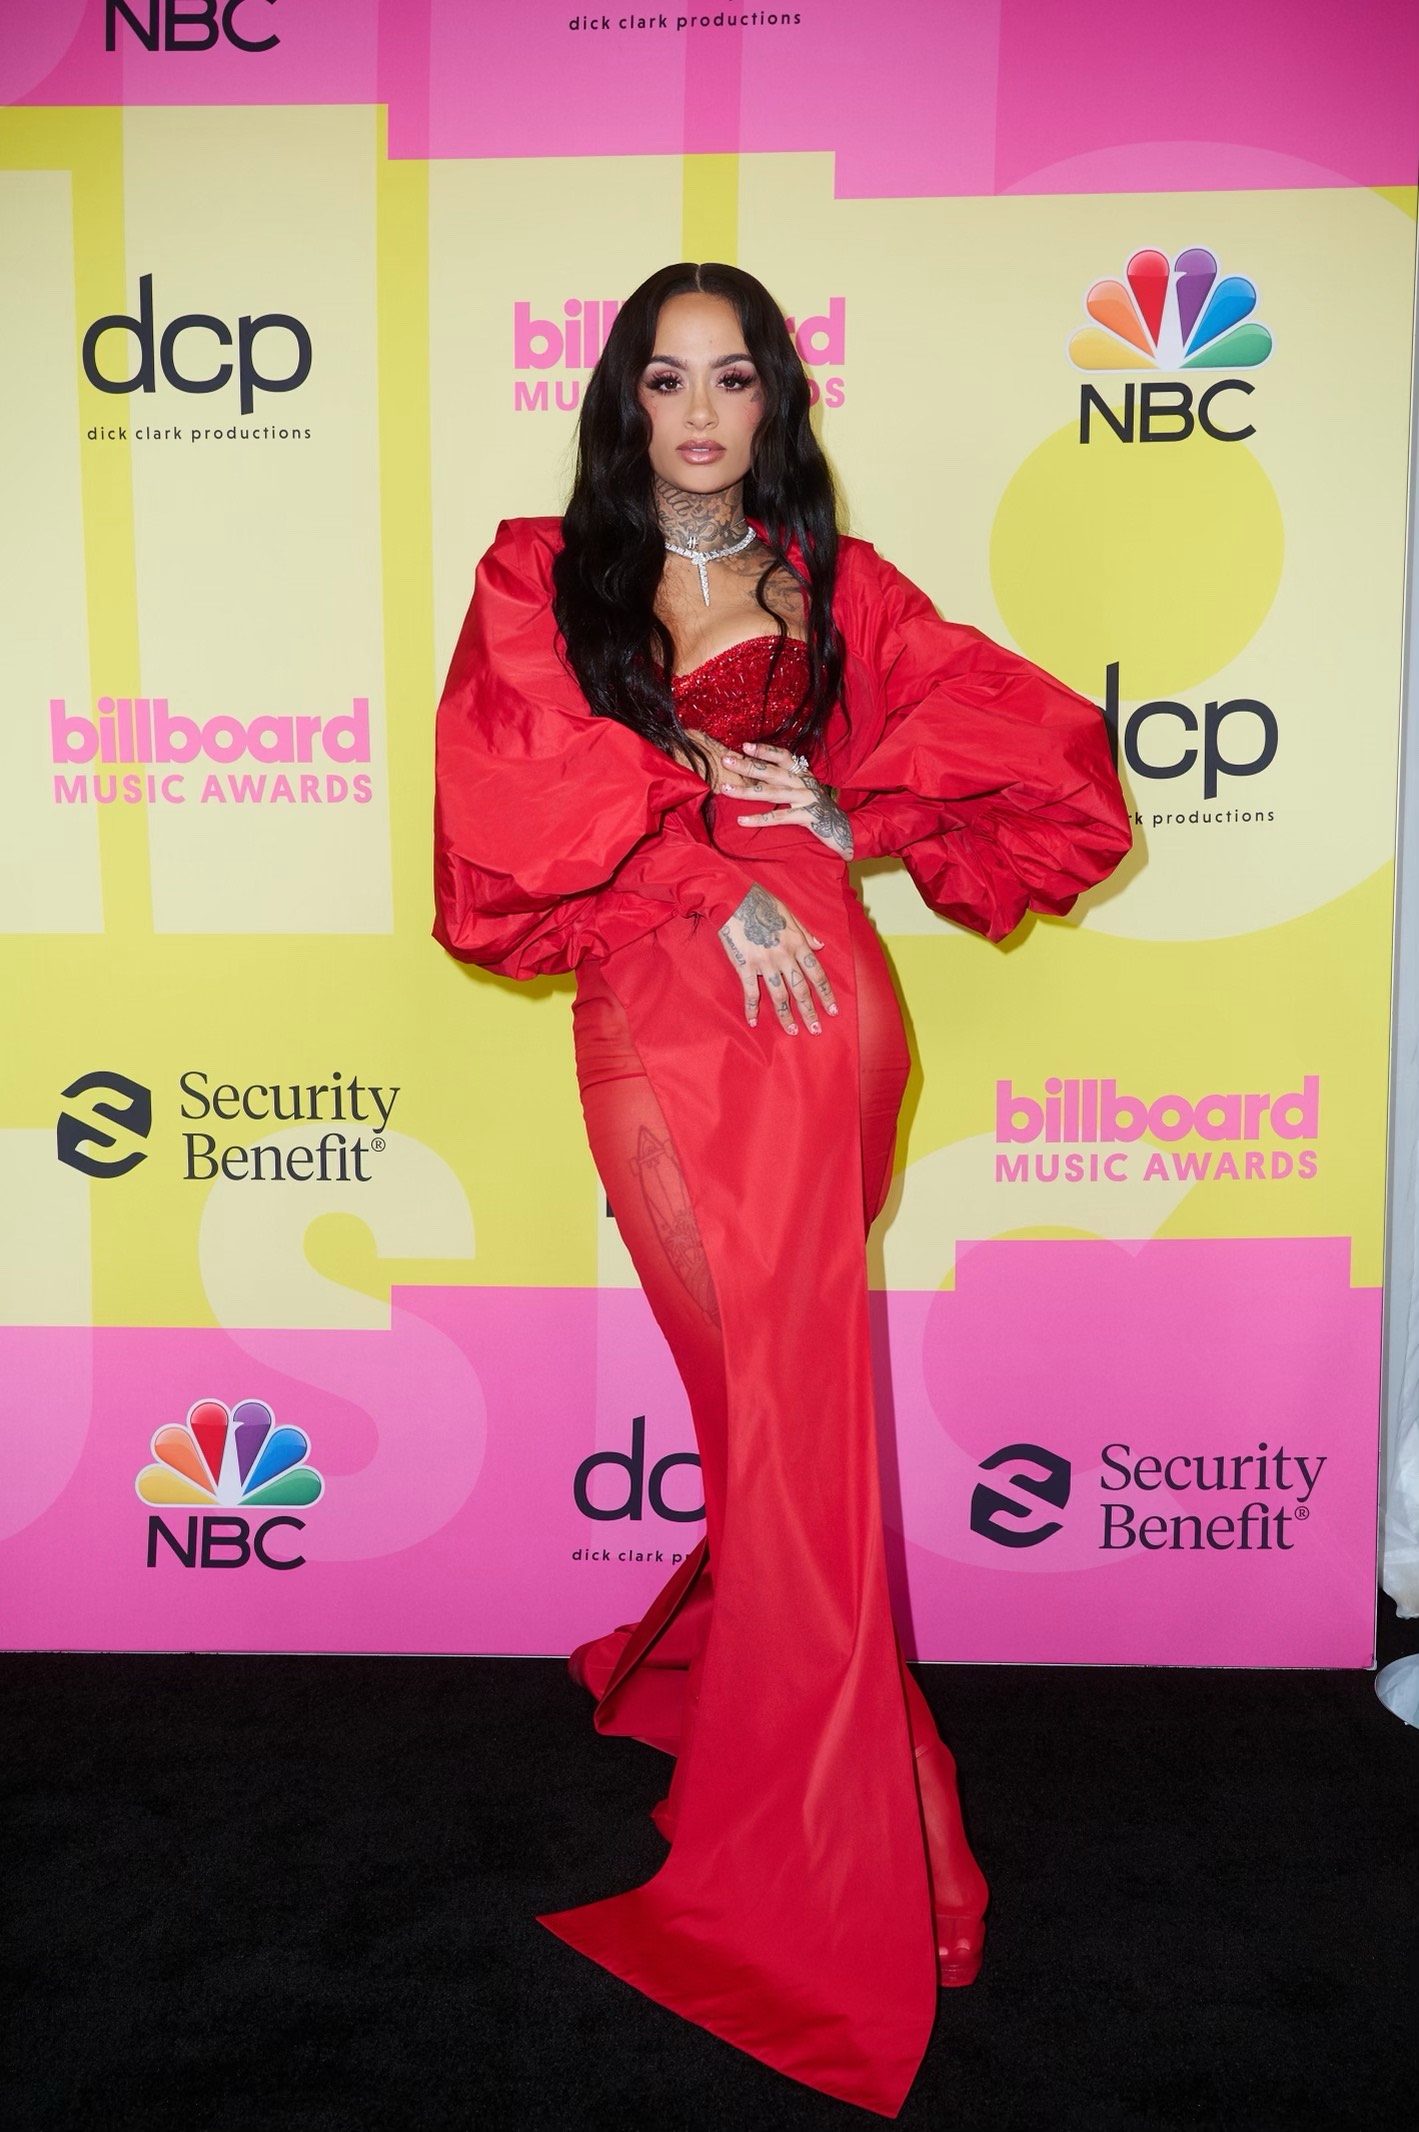 IN PHOTOS: Red carpet looks at the Billboard Music Awards 2021